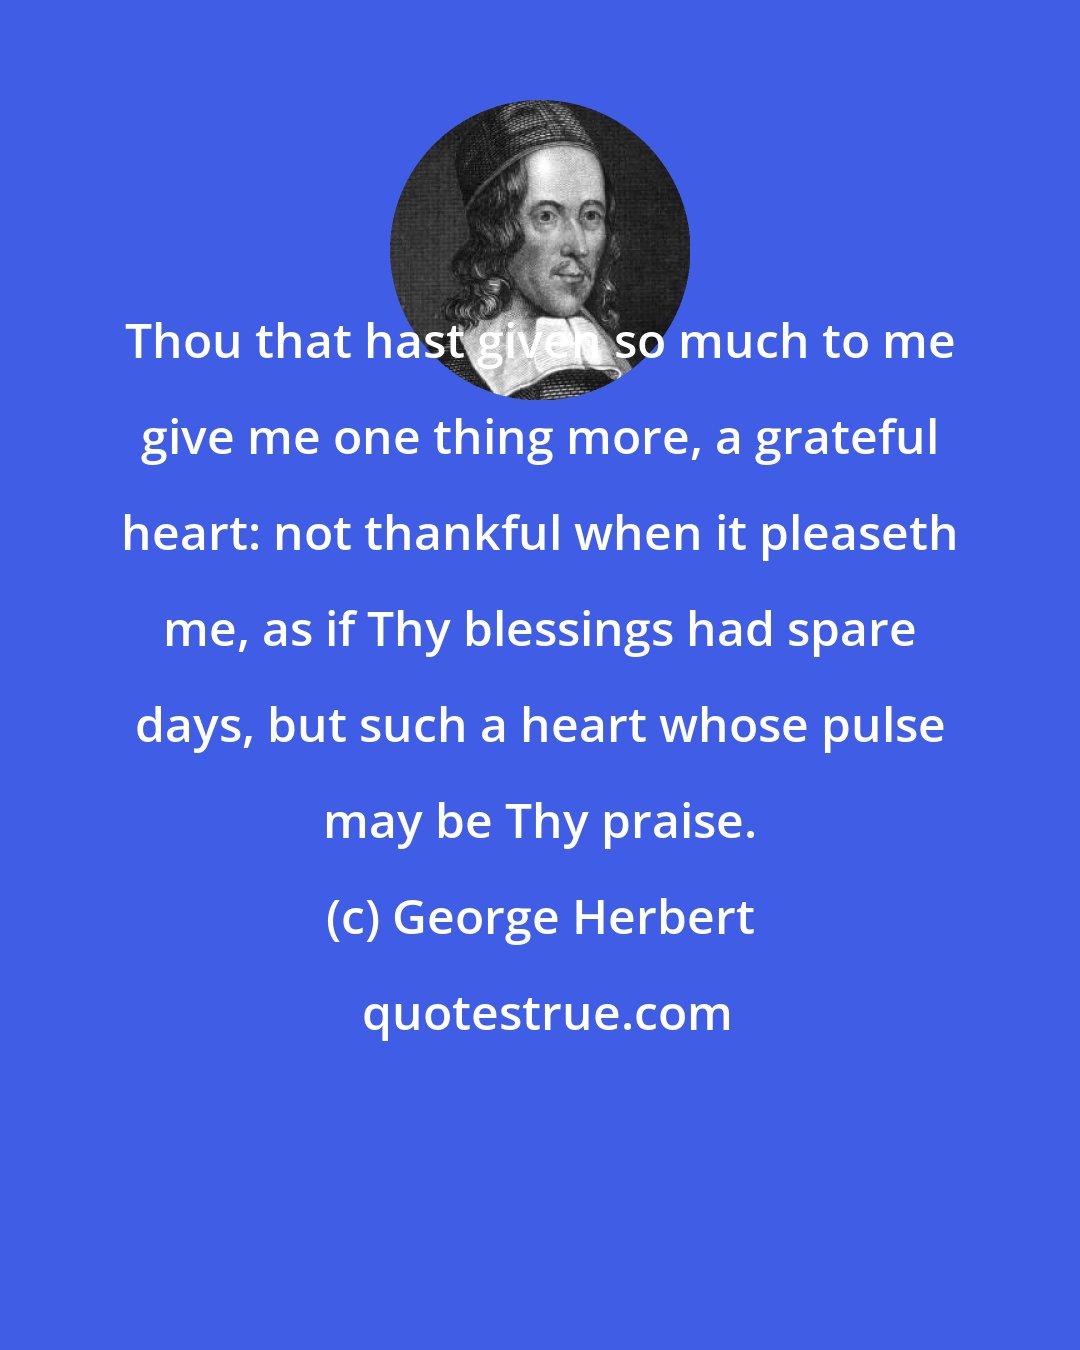 George Herbert: Thou that hast given so much to me give me one thing more, a grateful heart: not thankful when it pleaseth me, as if Thy blessings had spare days, but such a heart whose pulse may be Thy praise.